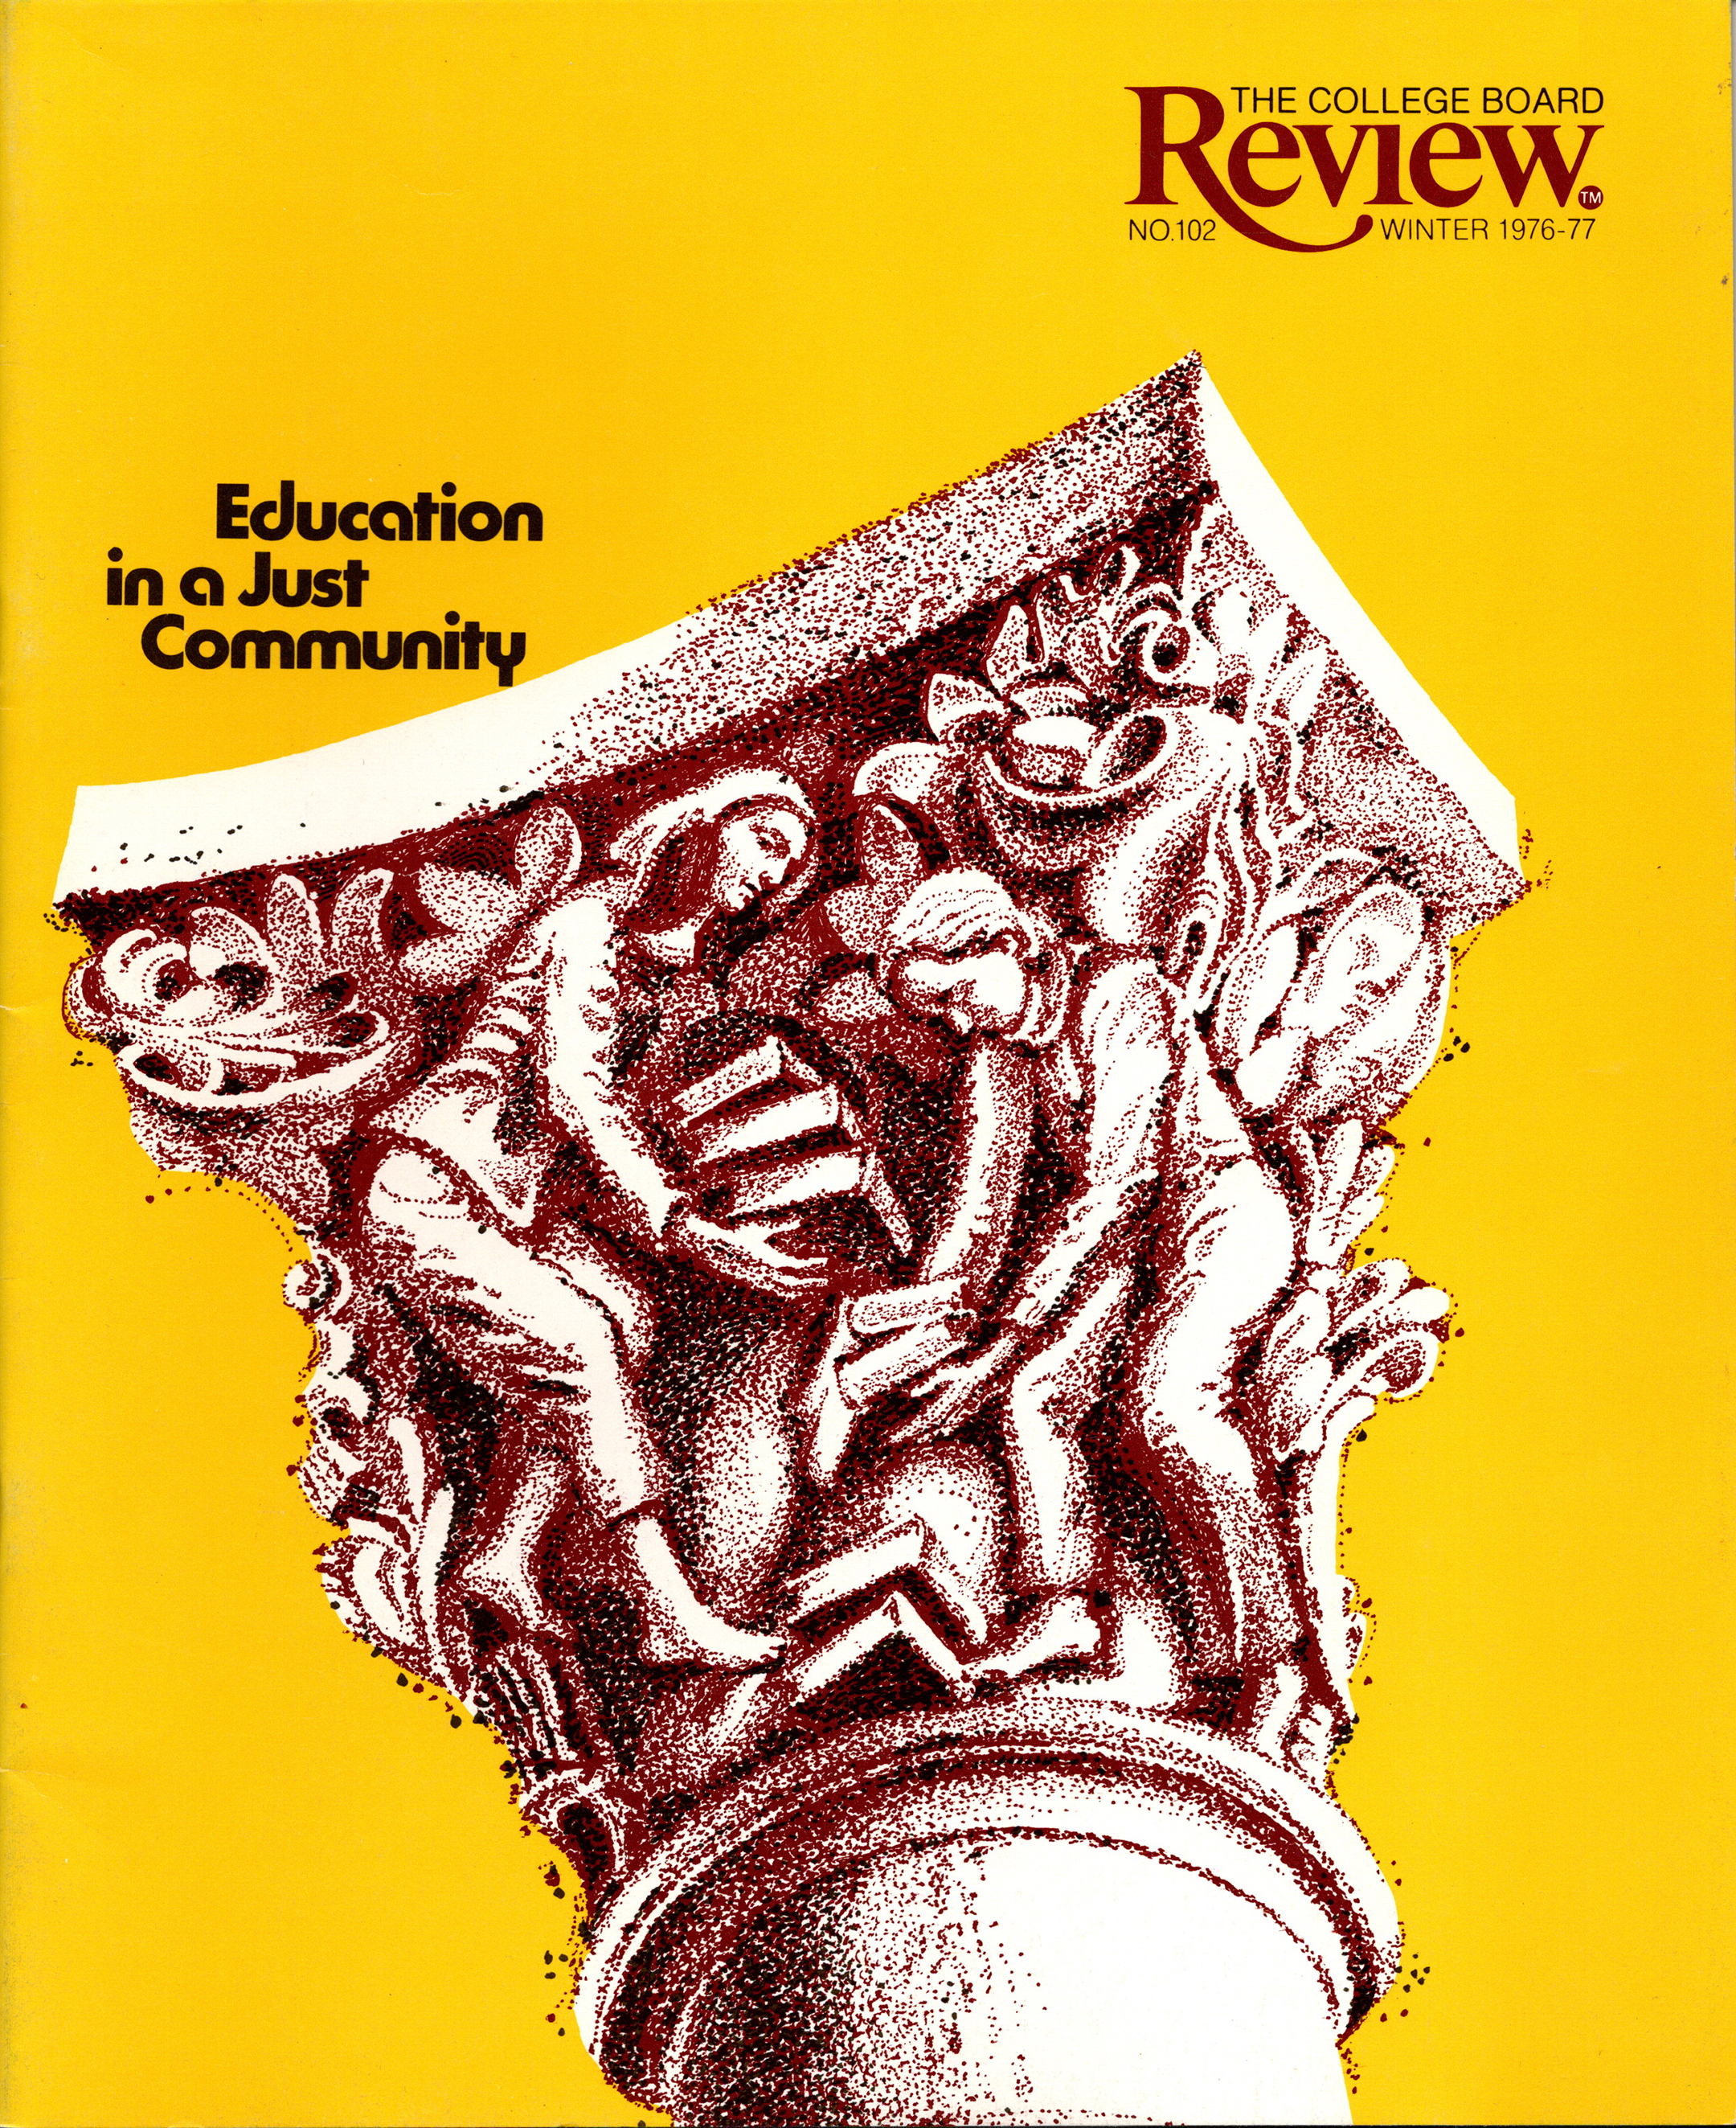 Cover of the winter 1976-77 issue of the college board review magazine